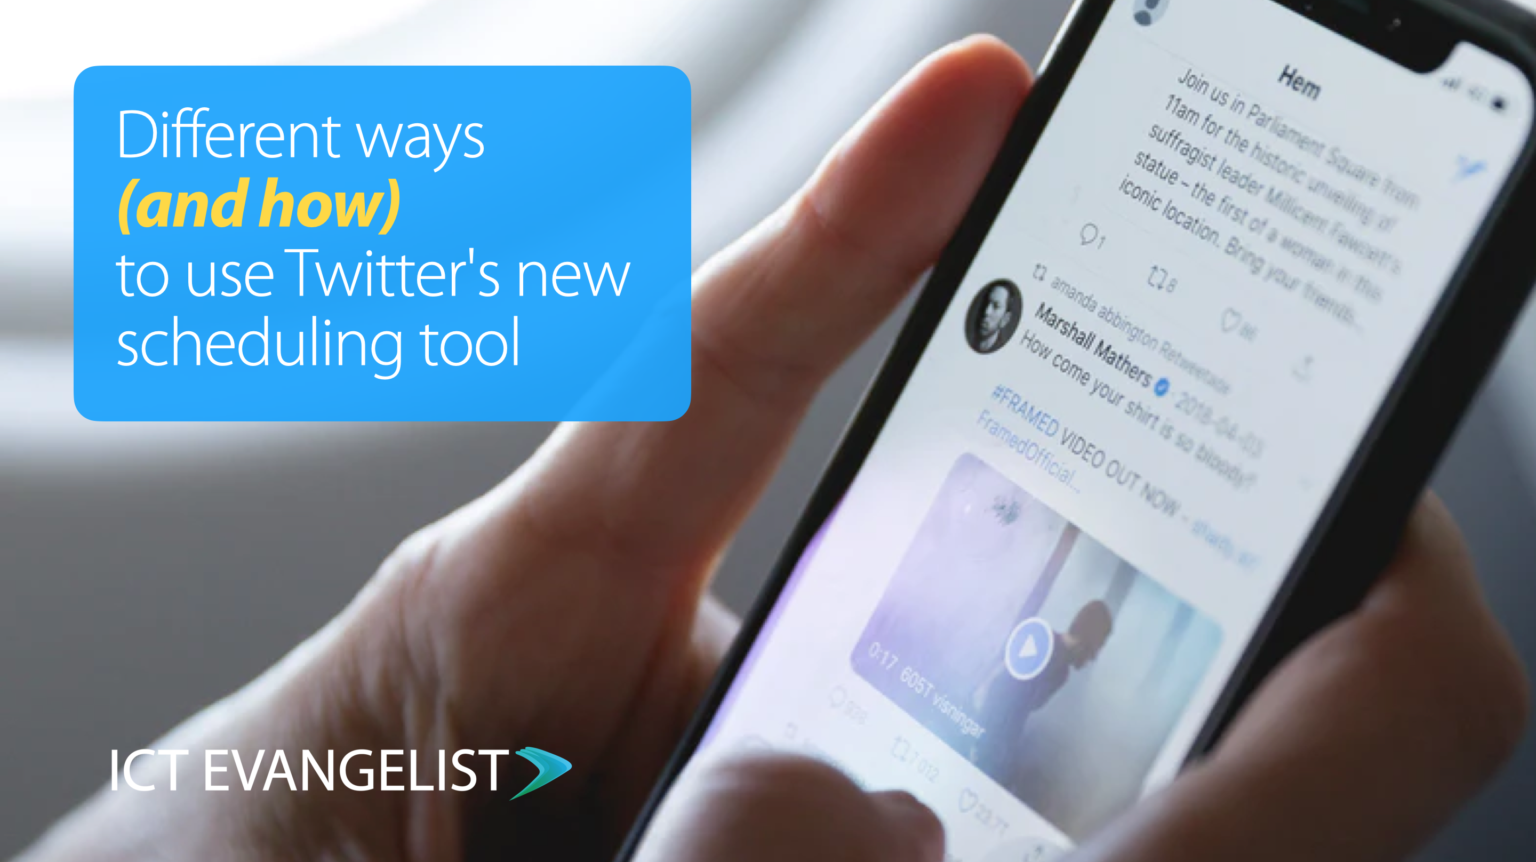 Different ways (and how) to use Twitter’s new scheduling tool